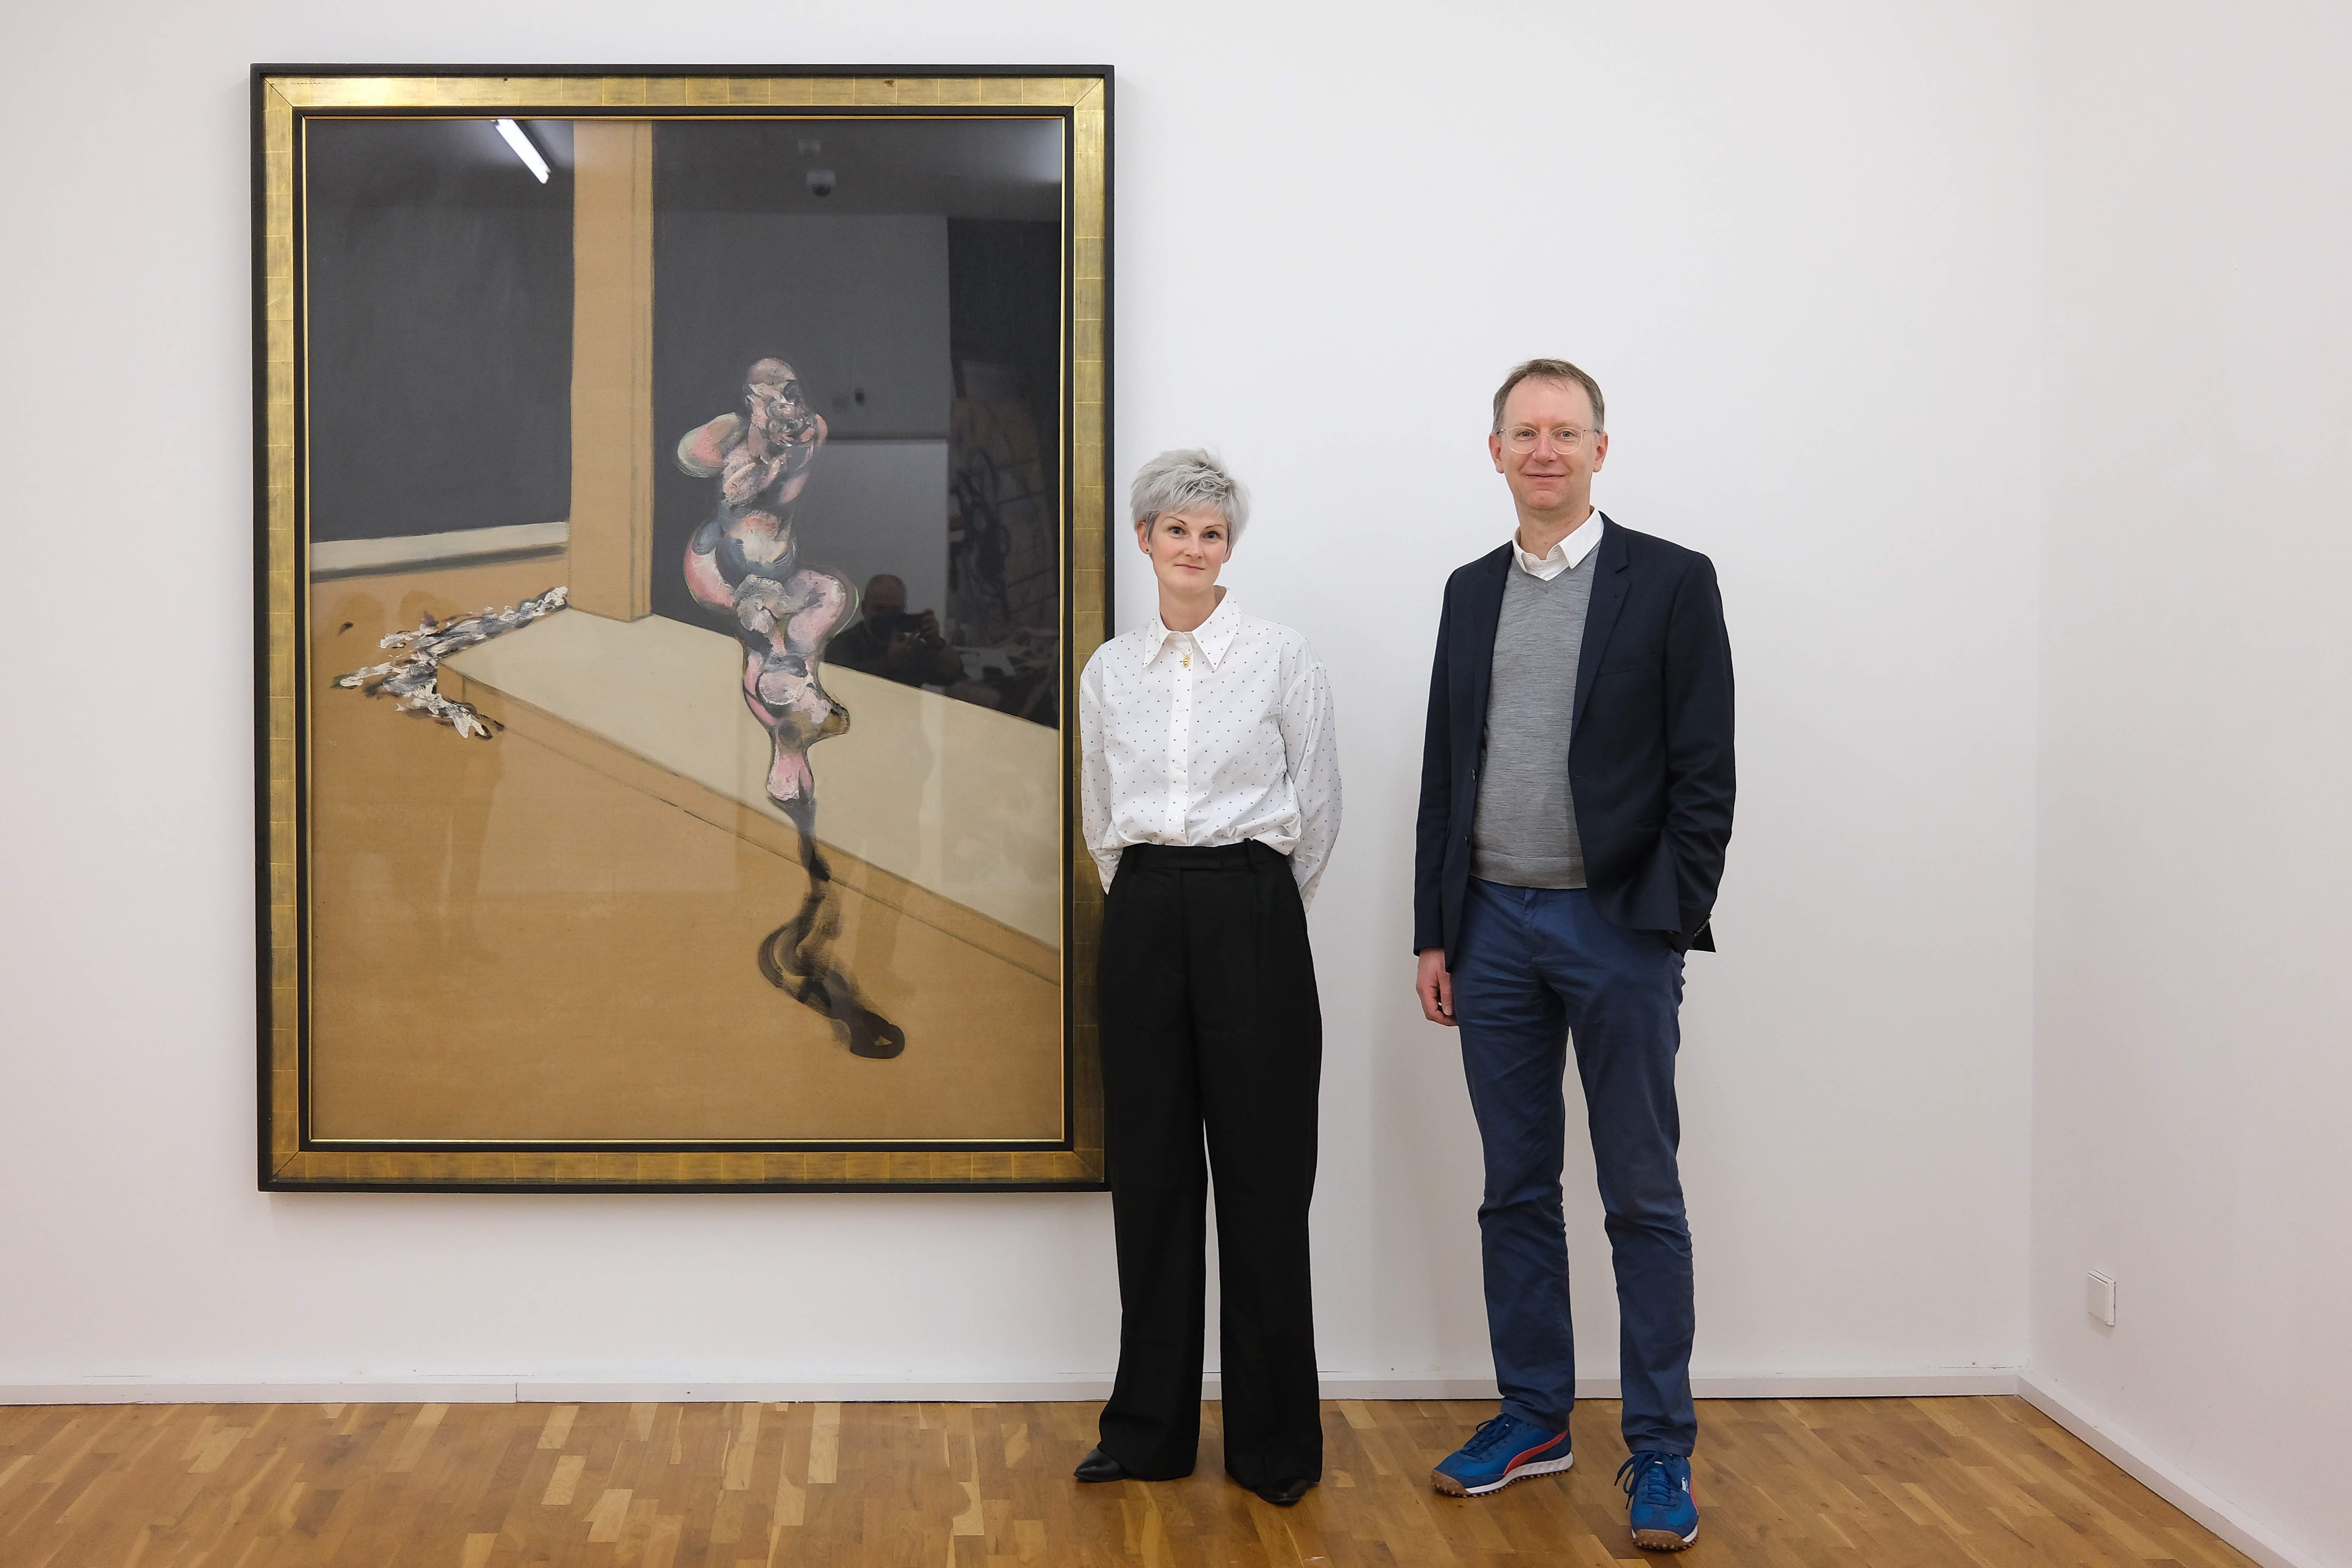 Katharina Günther and Christian Spies with Turning Figure, 1963 at The Museum of Contemporary Art in Siegen. Photo © Carsten Schmale. Artwork © The Estate of Francis Bacon